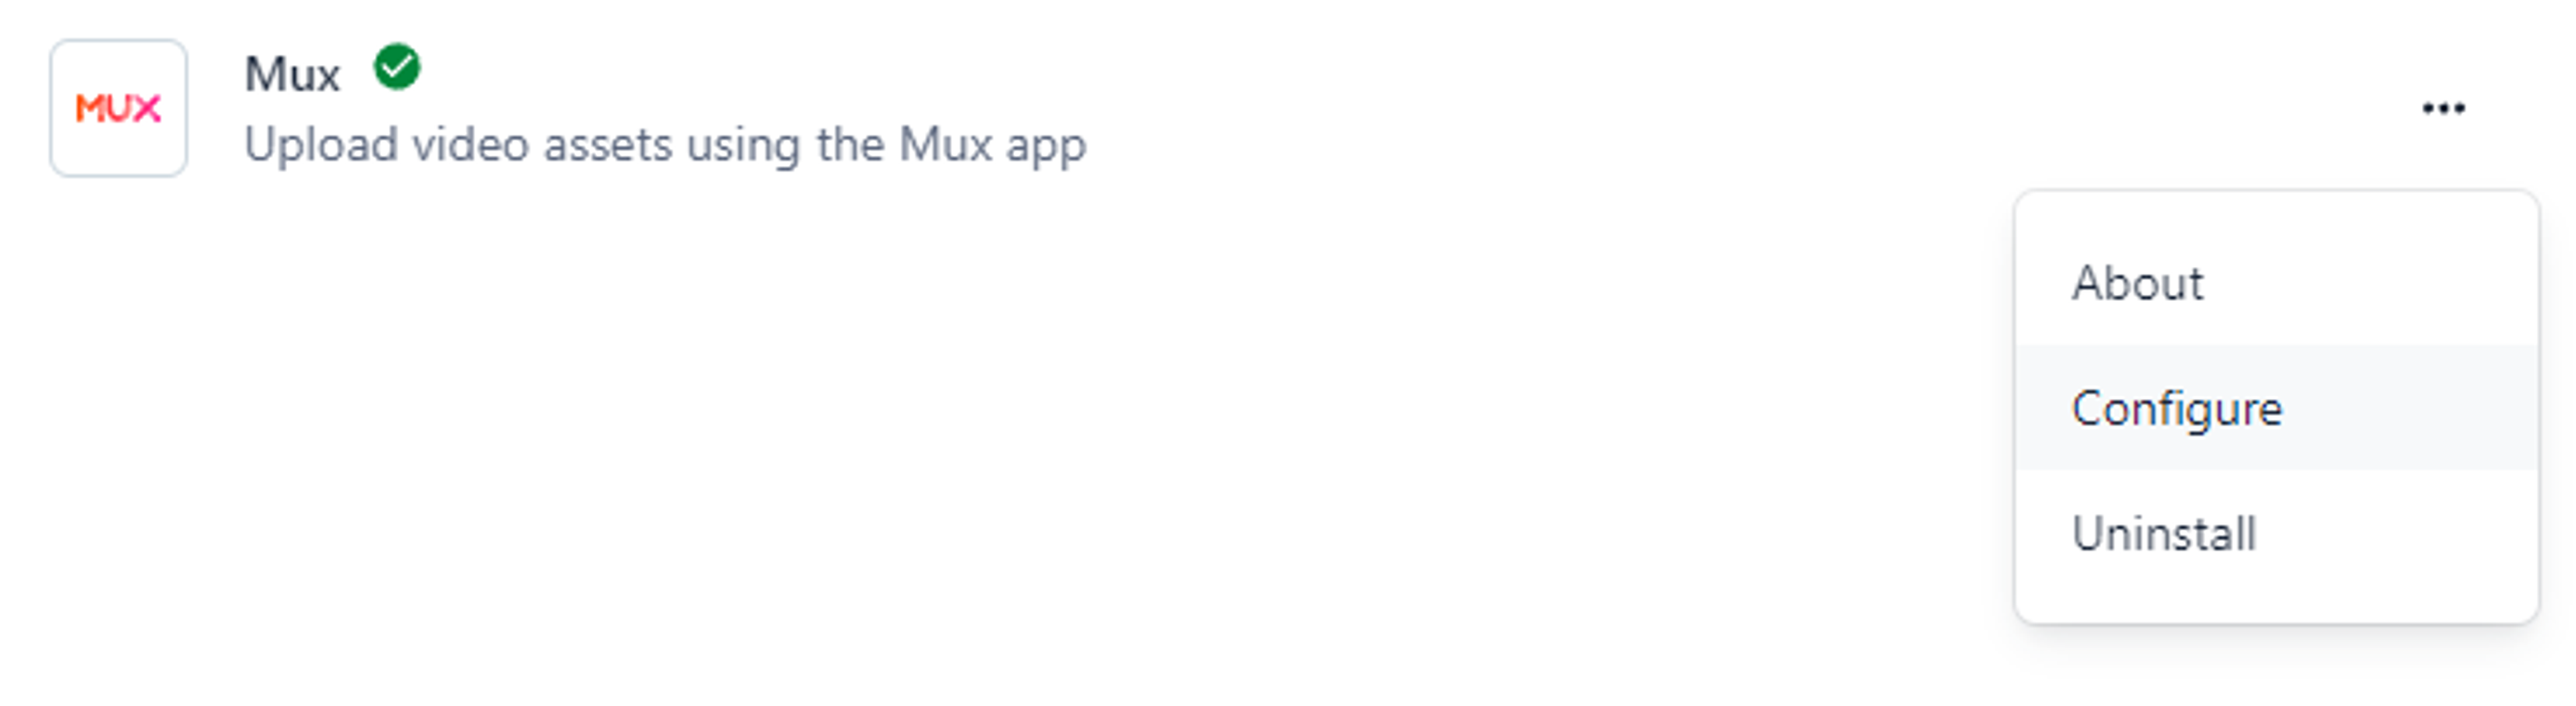 Click the options icon for the Mux app and select “Configure”